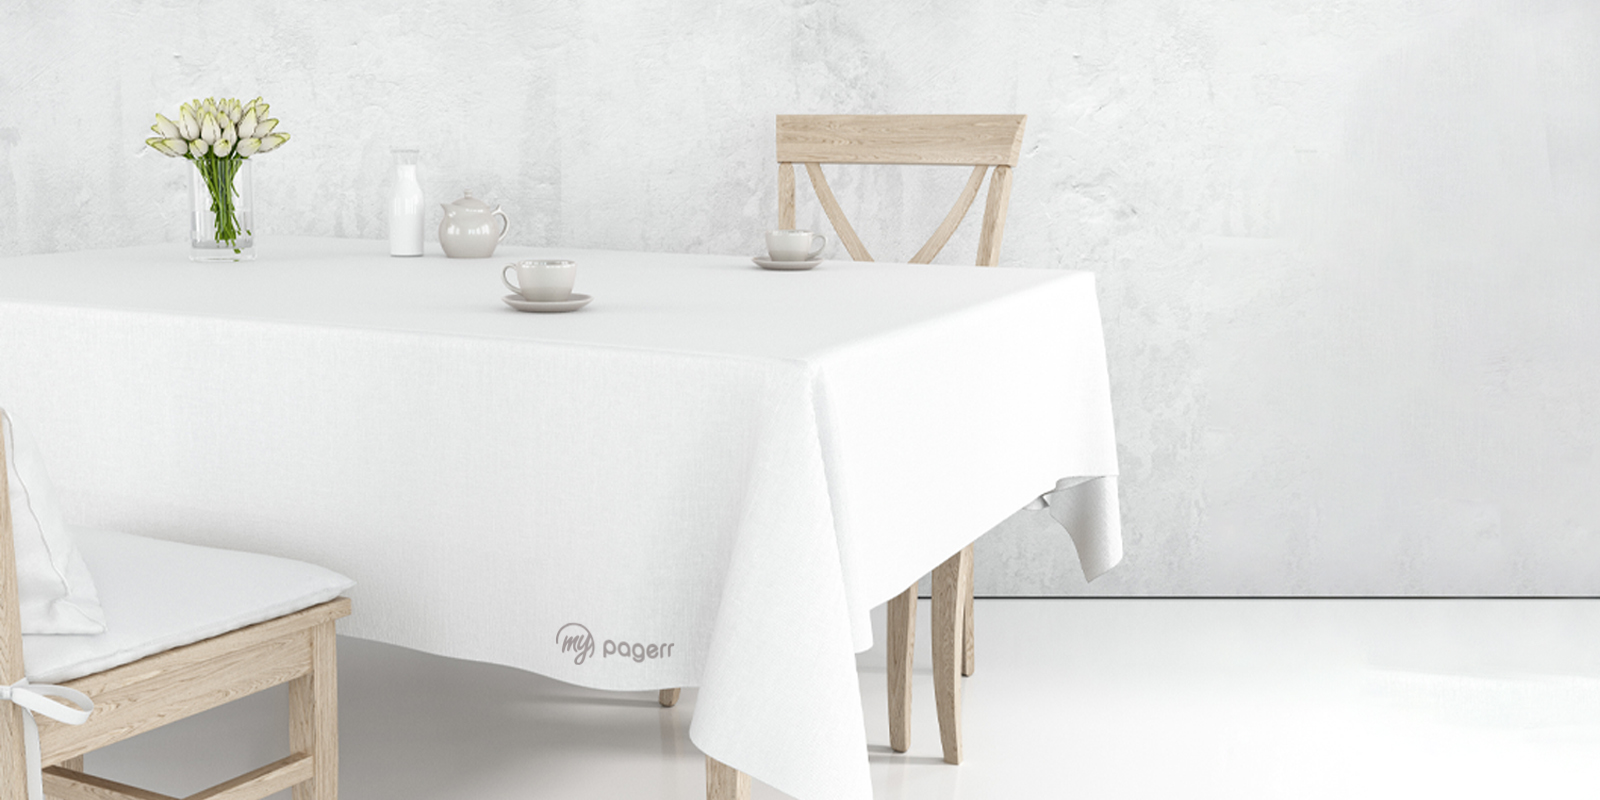 Tablecloths in Bucharest - Print with Pagerr